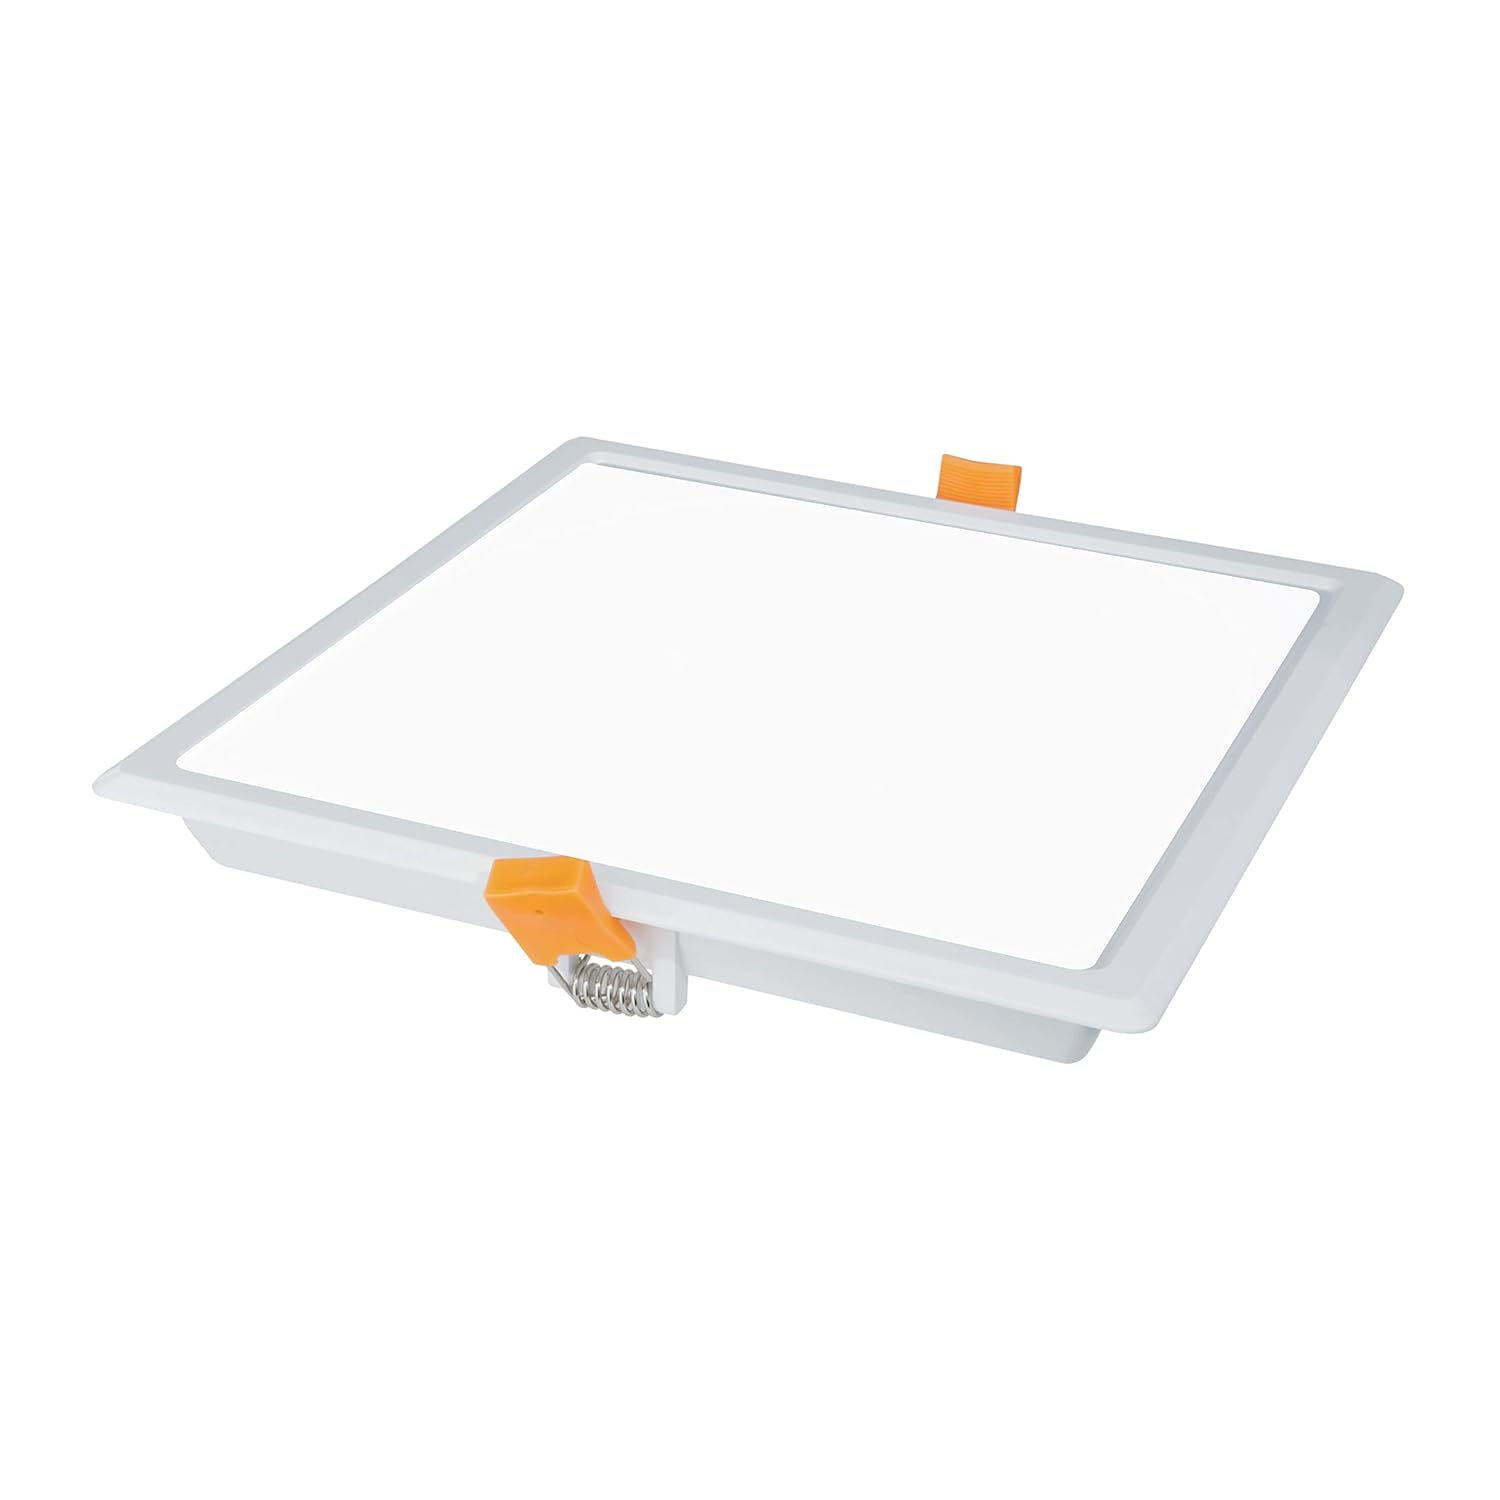 Orient 8W Square 3 in 1 LED Panel Light  (ColorCool White,Warm White-,Natural White)